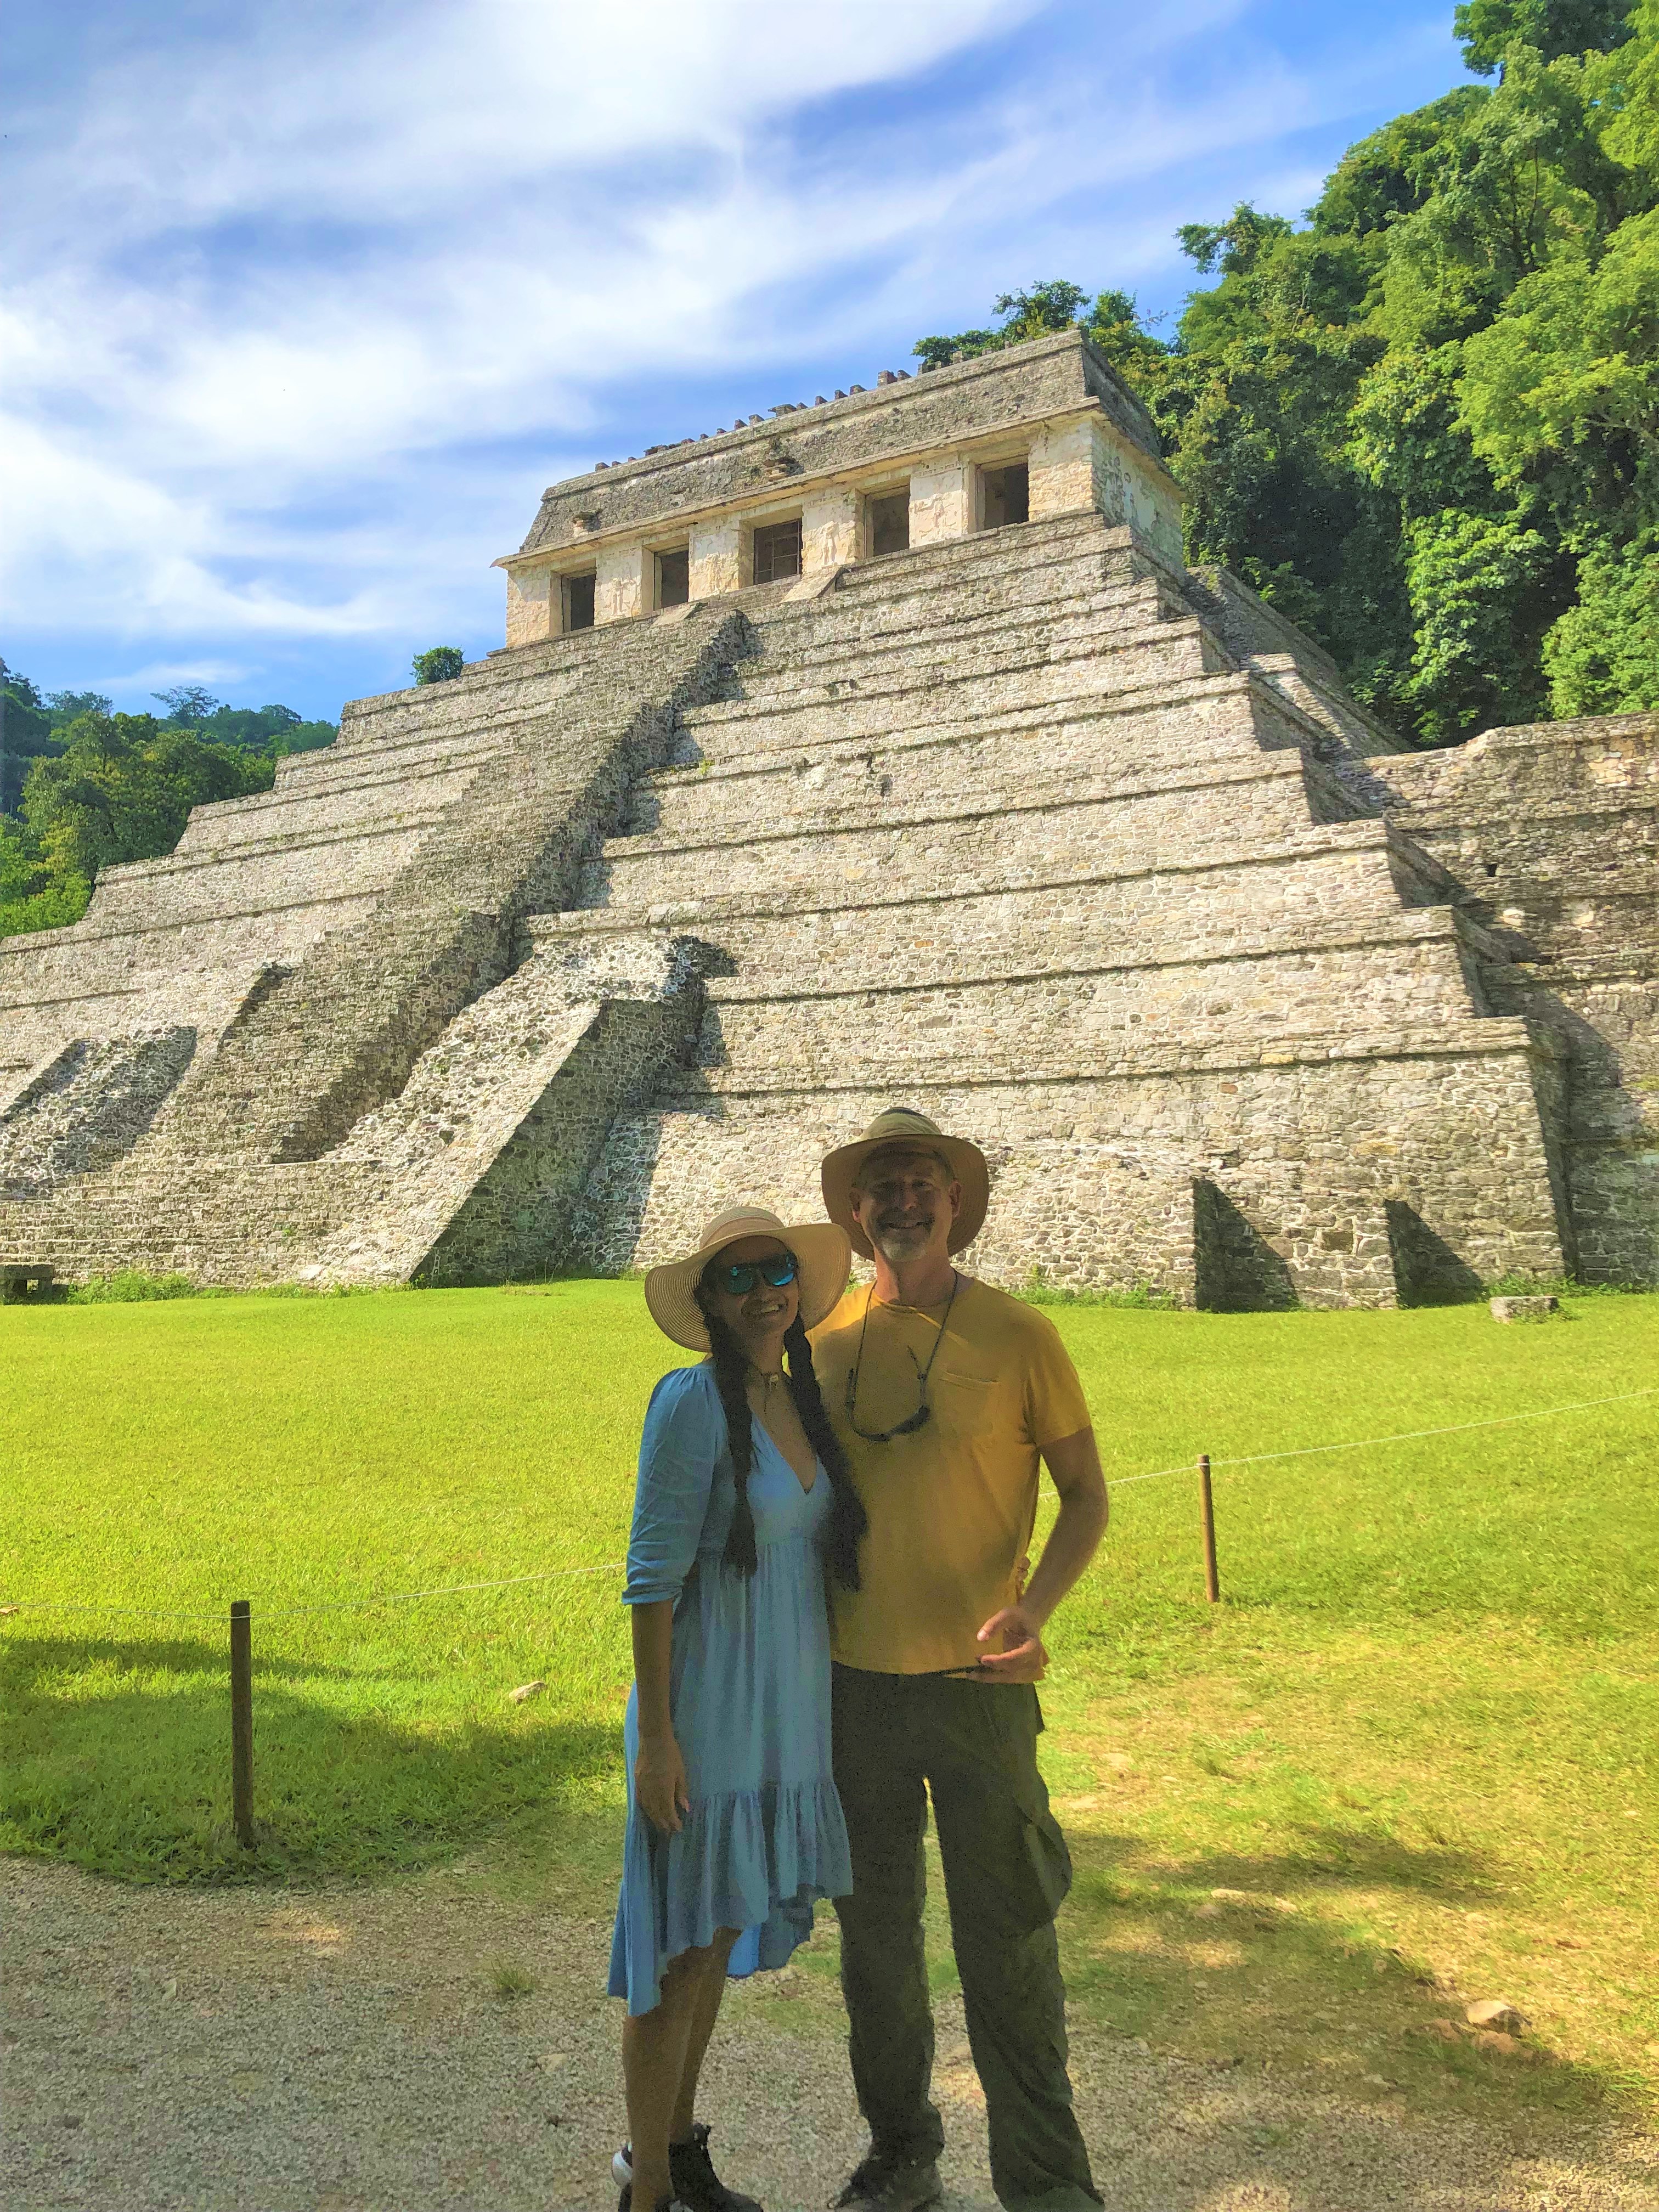 Palenque is the last major Mayan ruins we visited